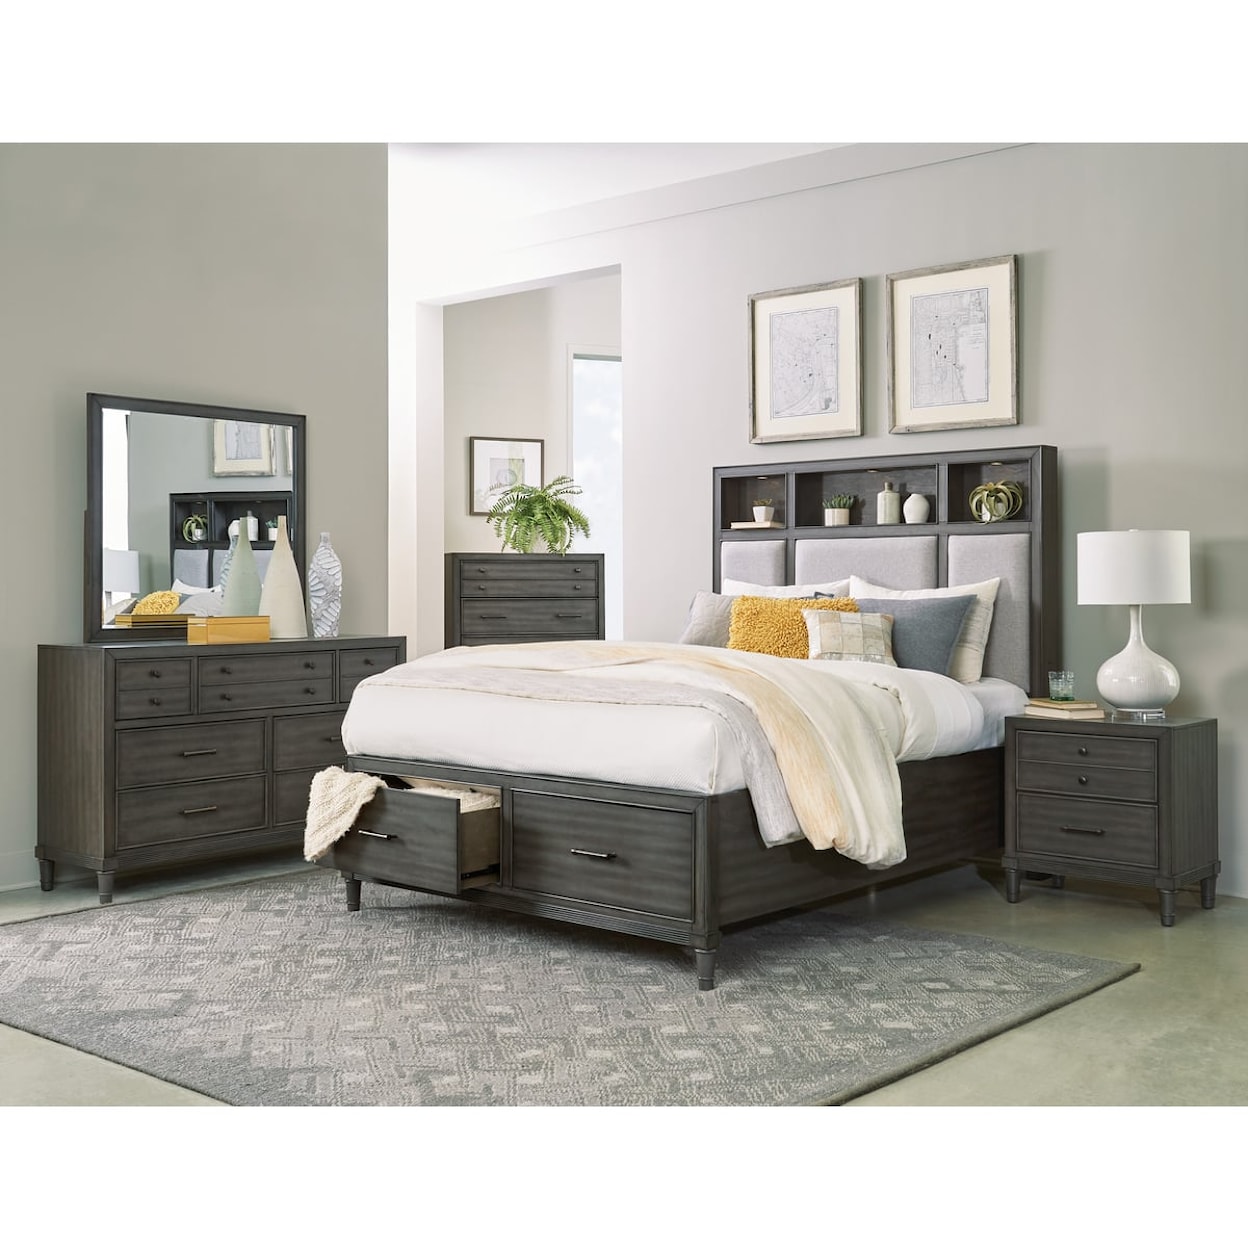 Homelegance Furniture Wittenberry Bedroom Chest